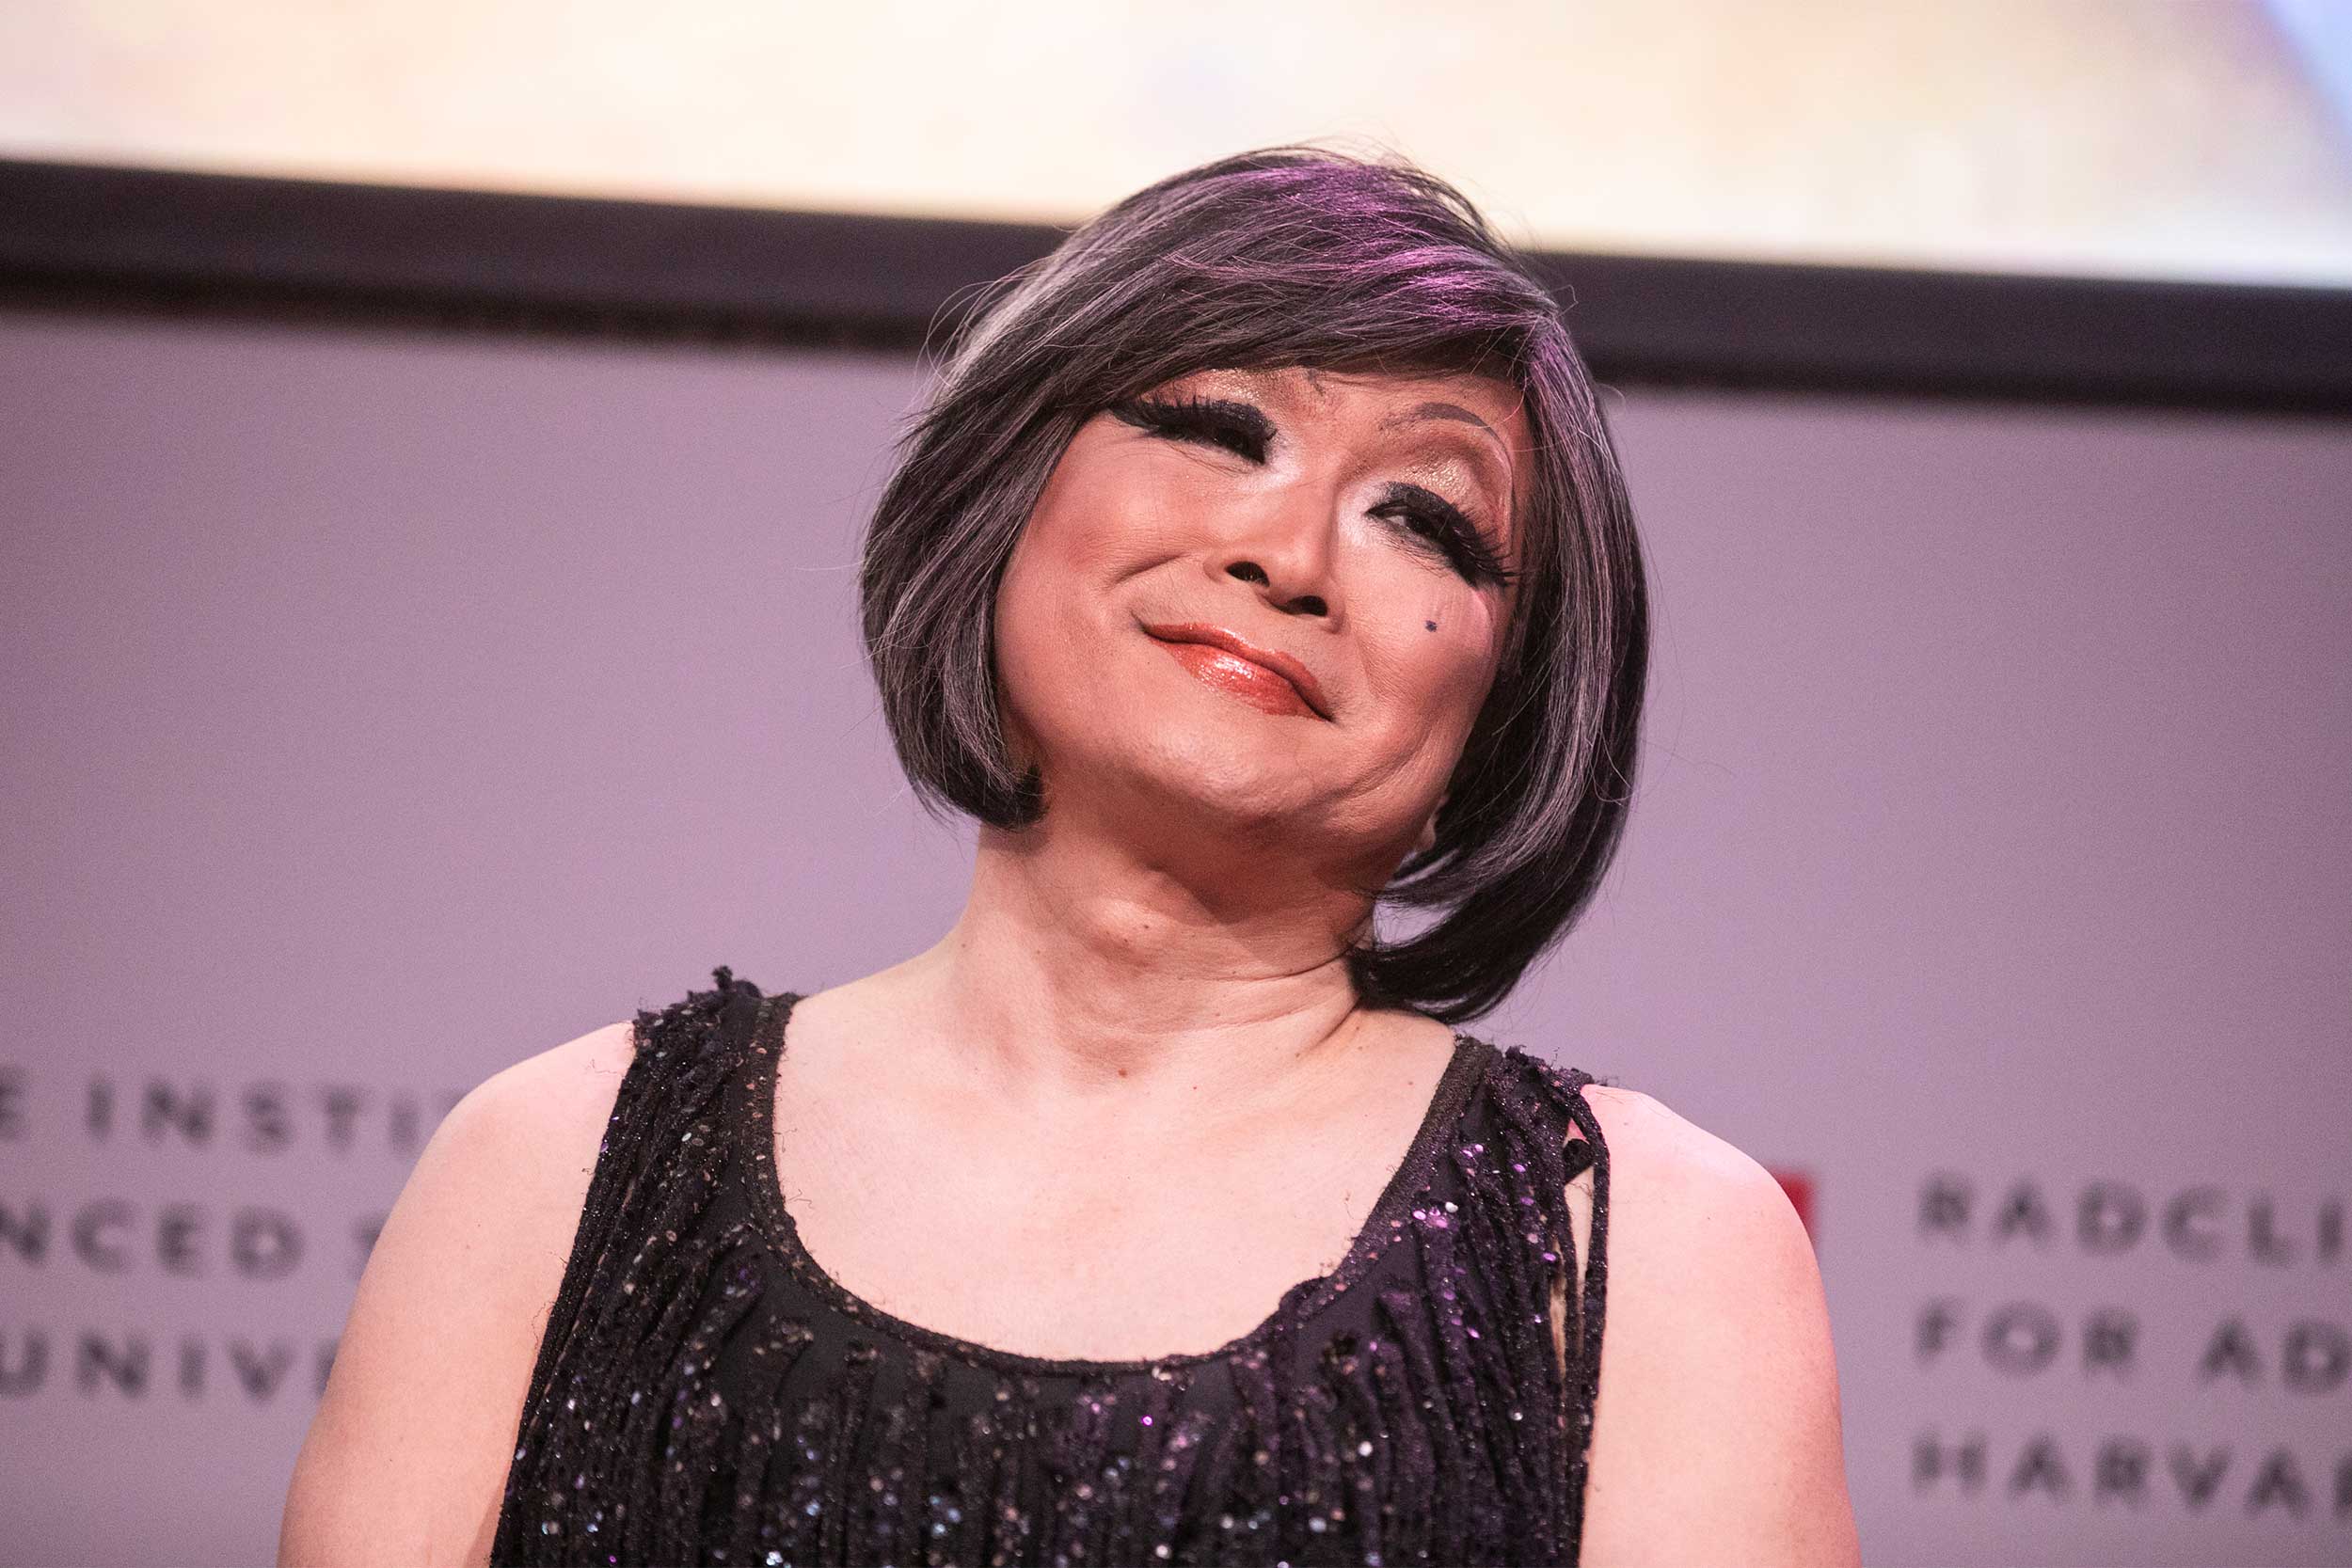 Shigehisa Kuriyama, Faculty Director of the Humanities Program, Radcliffe Institute, takes a bow after being given a gender makeover on stage.